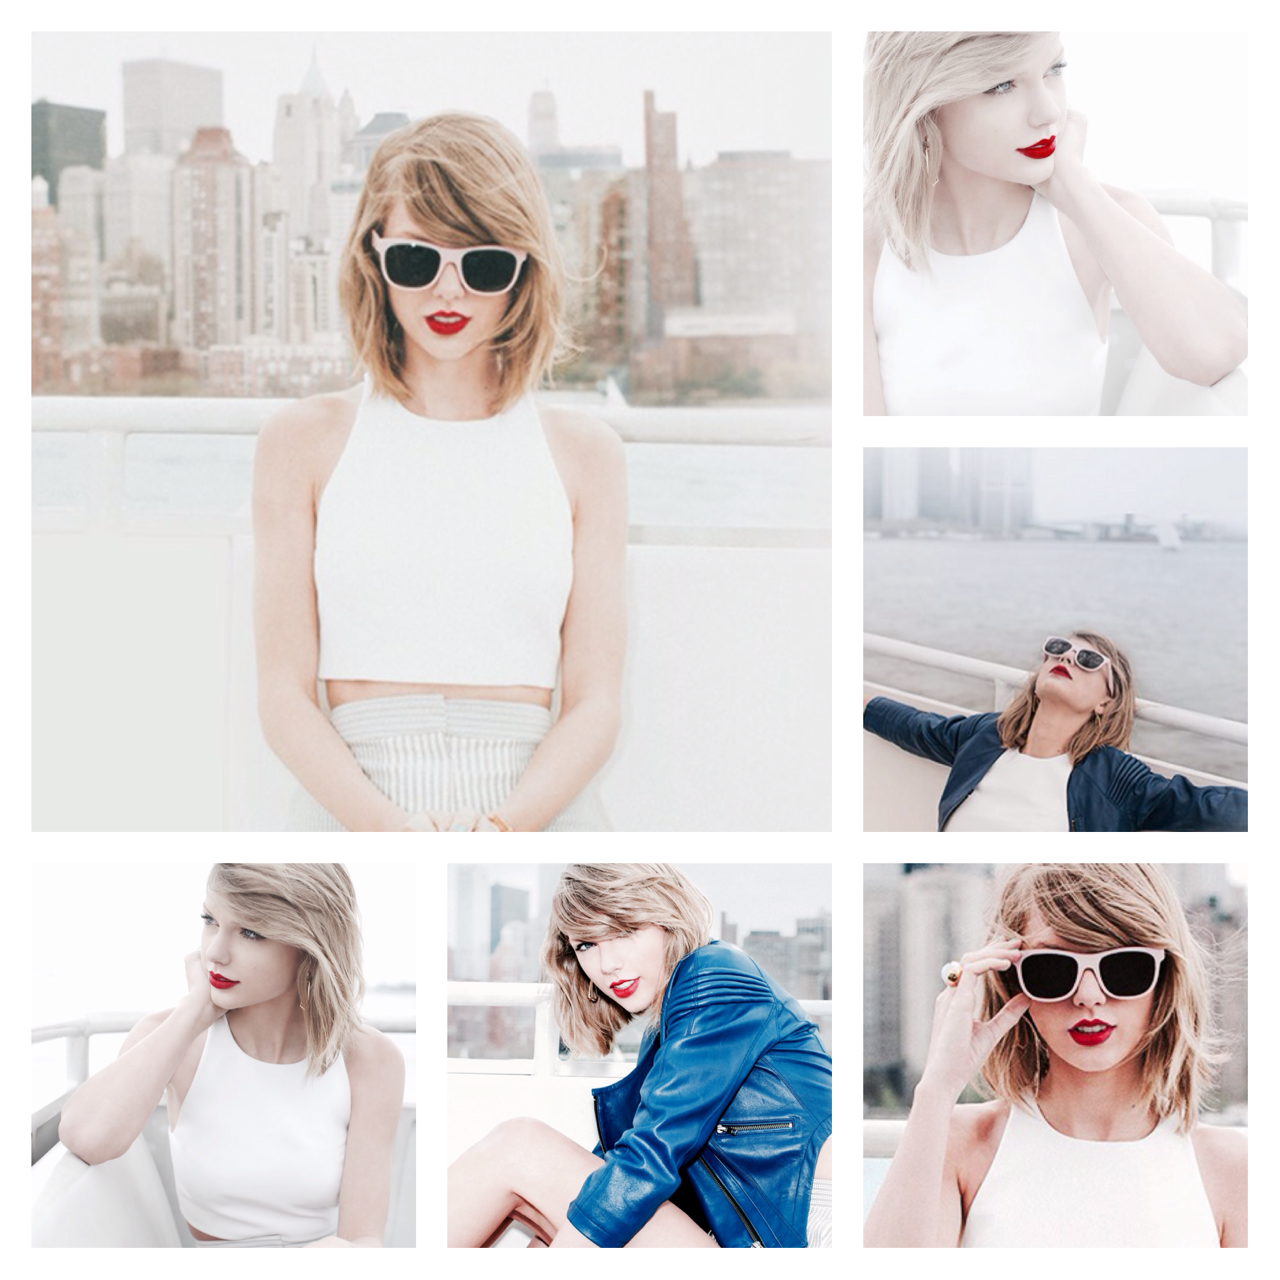 Best Taylor Swift Photoshoot 1989 Images